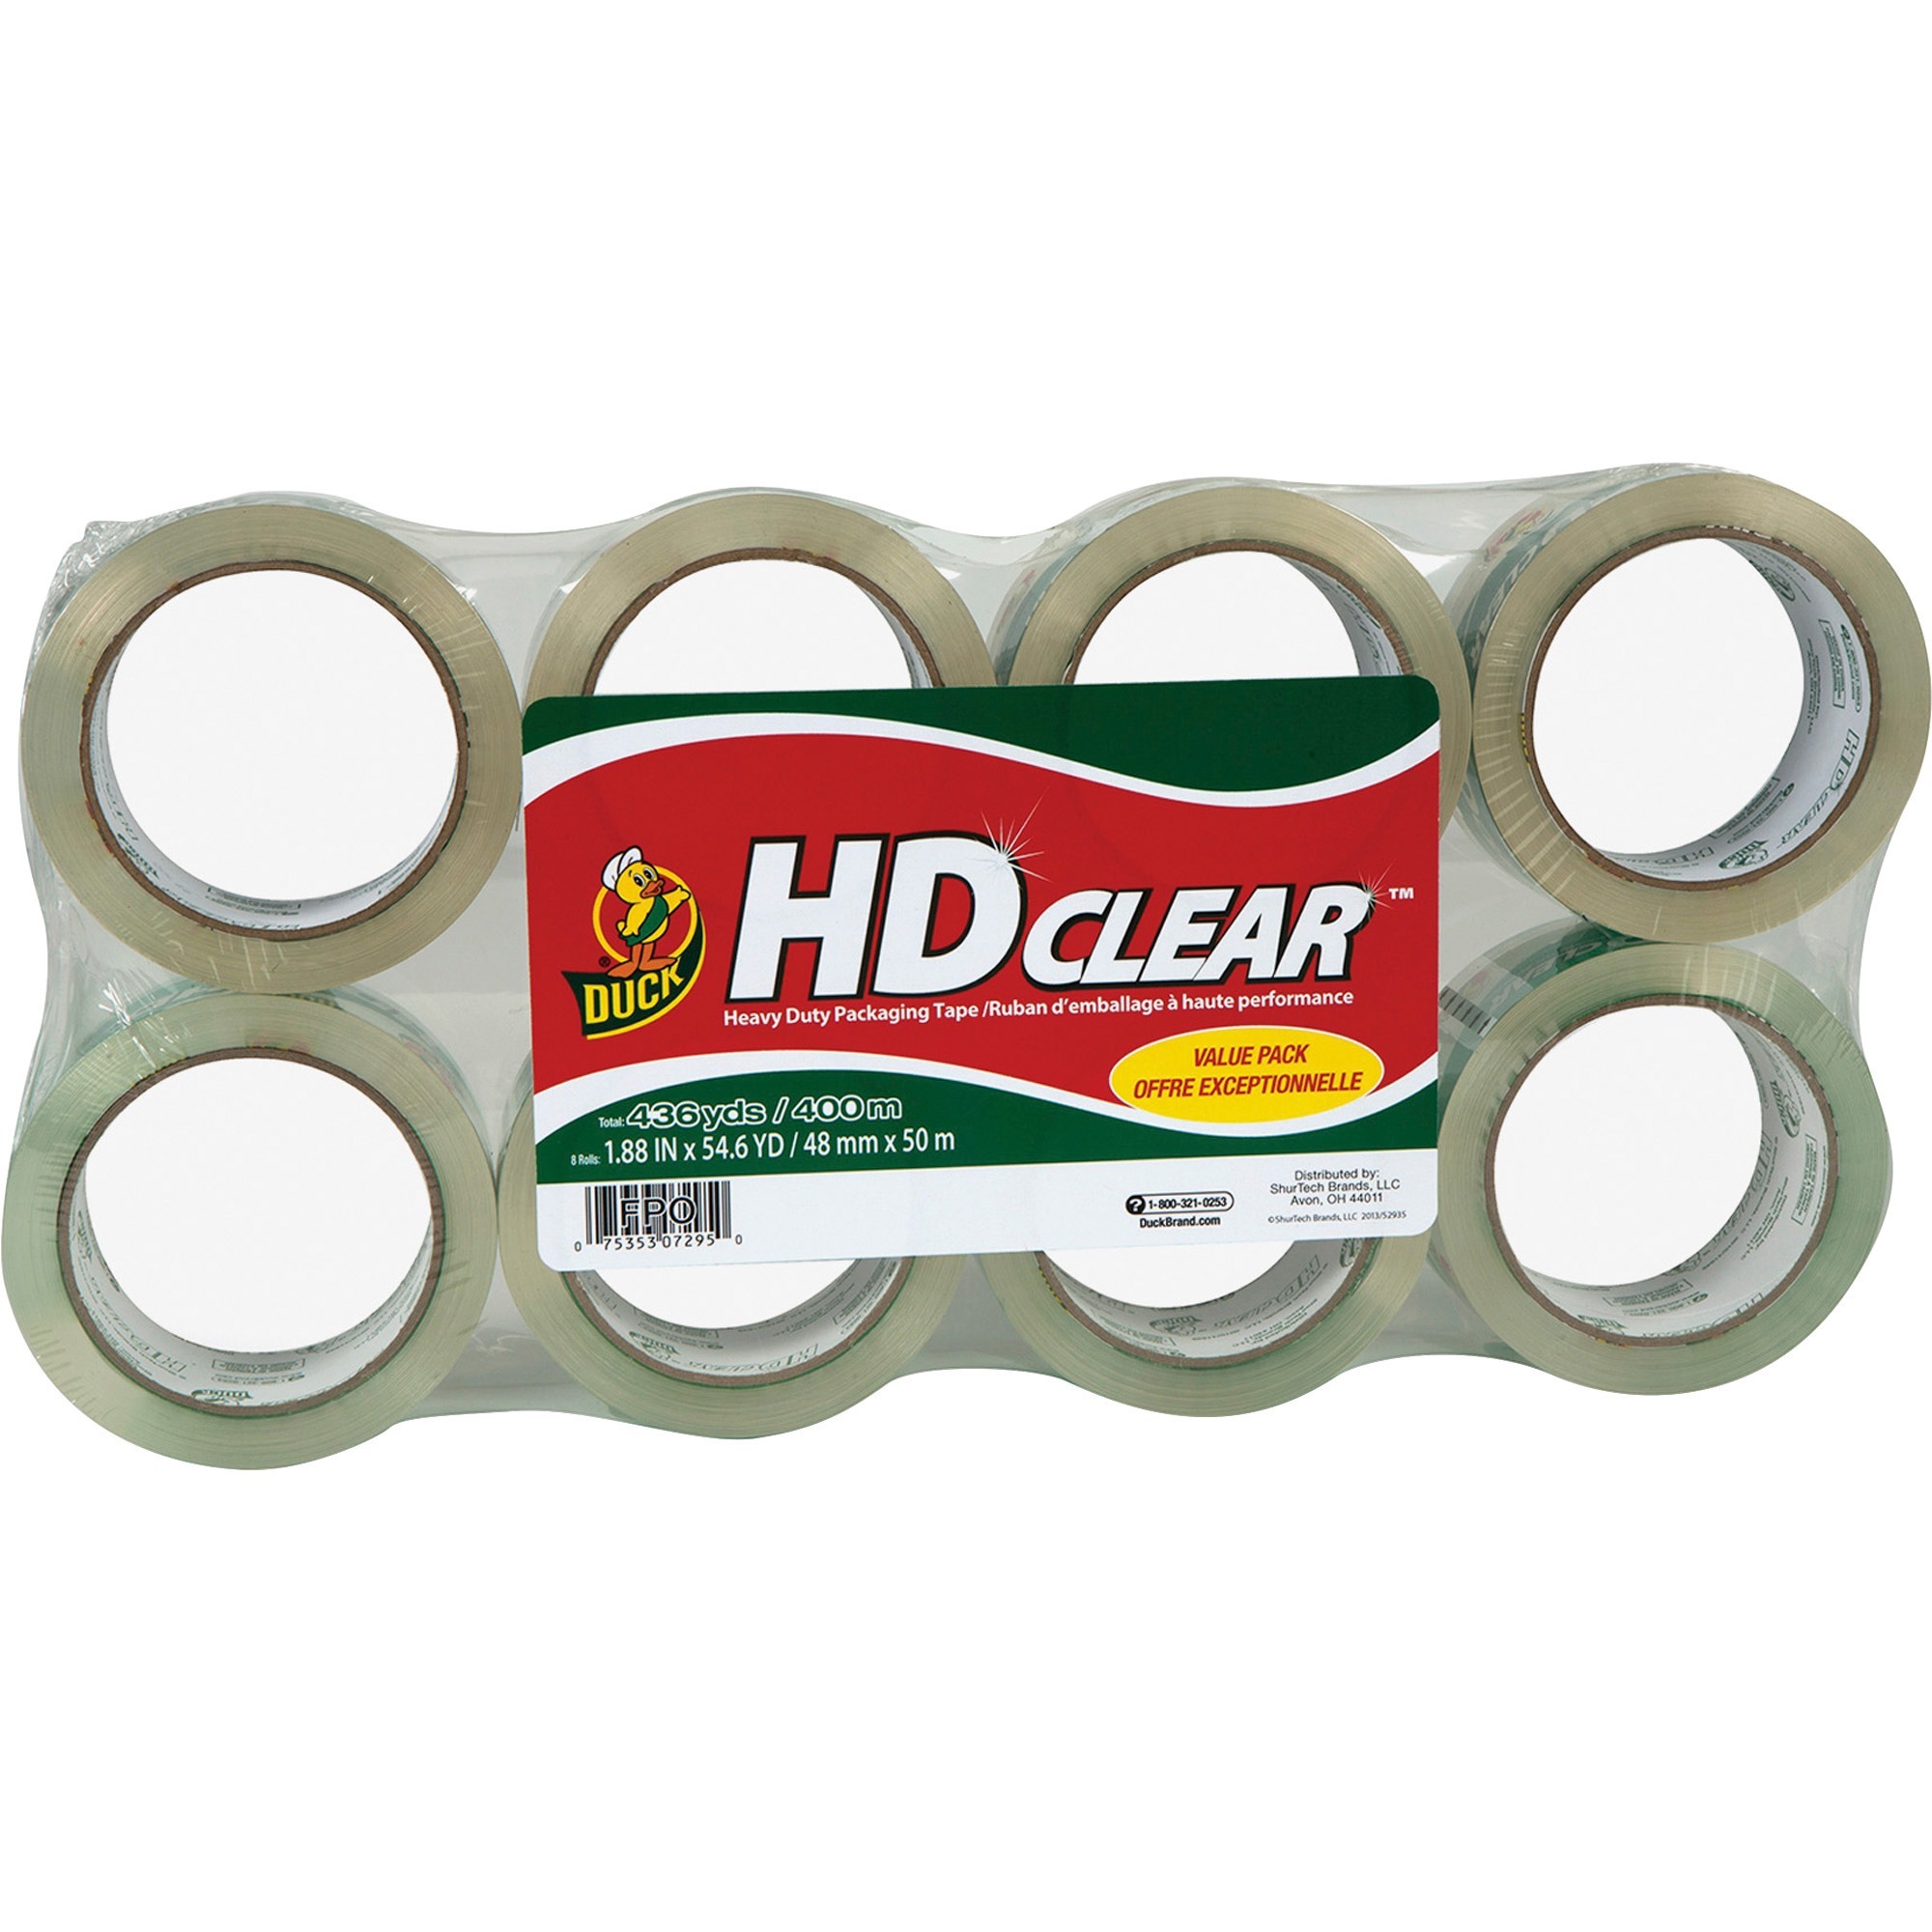 Duck Brand HD Clear Packing Tape - 54.60 yd Length x 1.88" Width - 2.6 mil Thickness - 3" Core - Acrylic - 8 / Pack - Crystal Cl